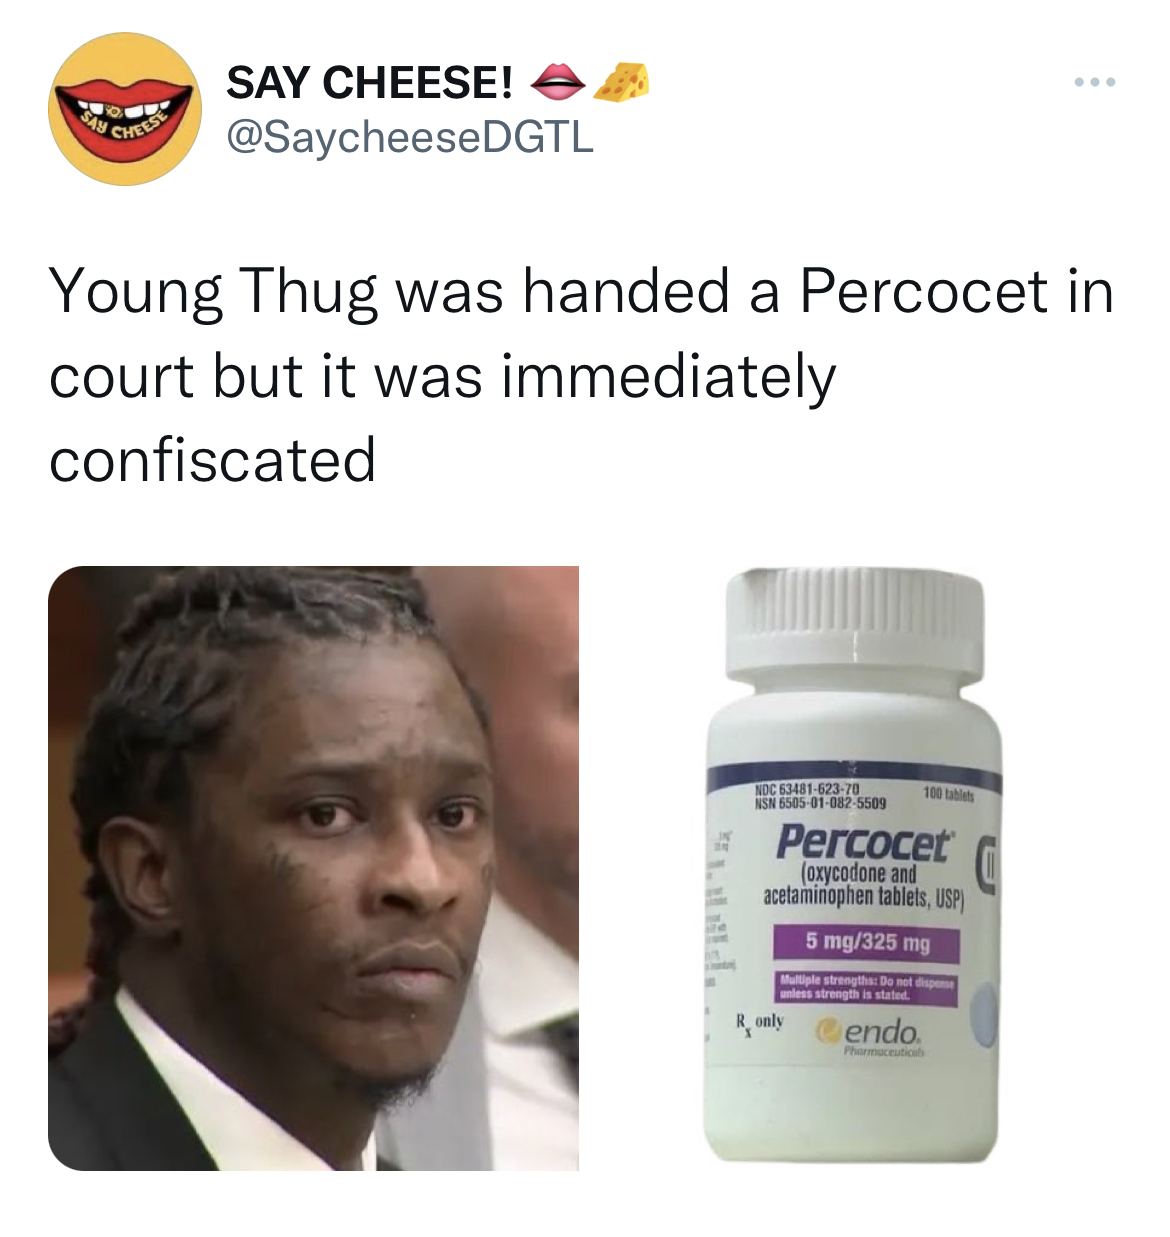 Tweets Dunking on Celebs - Oxycodone - Say Cheese! Dgtl Young Thug was handed a Percocet in court but it was immediately confiscated stattel. Arc 1941475.78 Percocet axycodone and acetaminophen tablets, Usp 5 mg325 mg Wh Roy endo